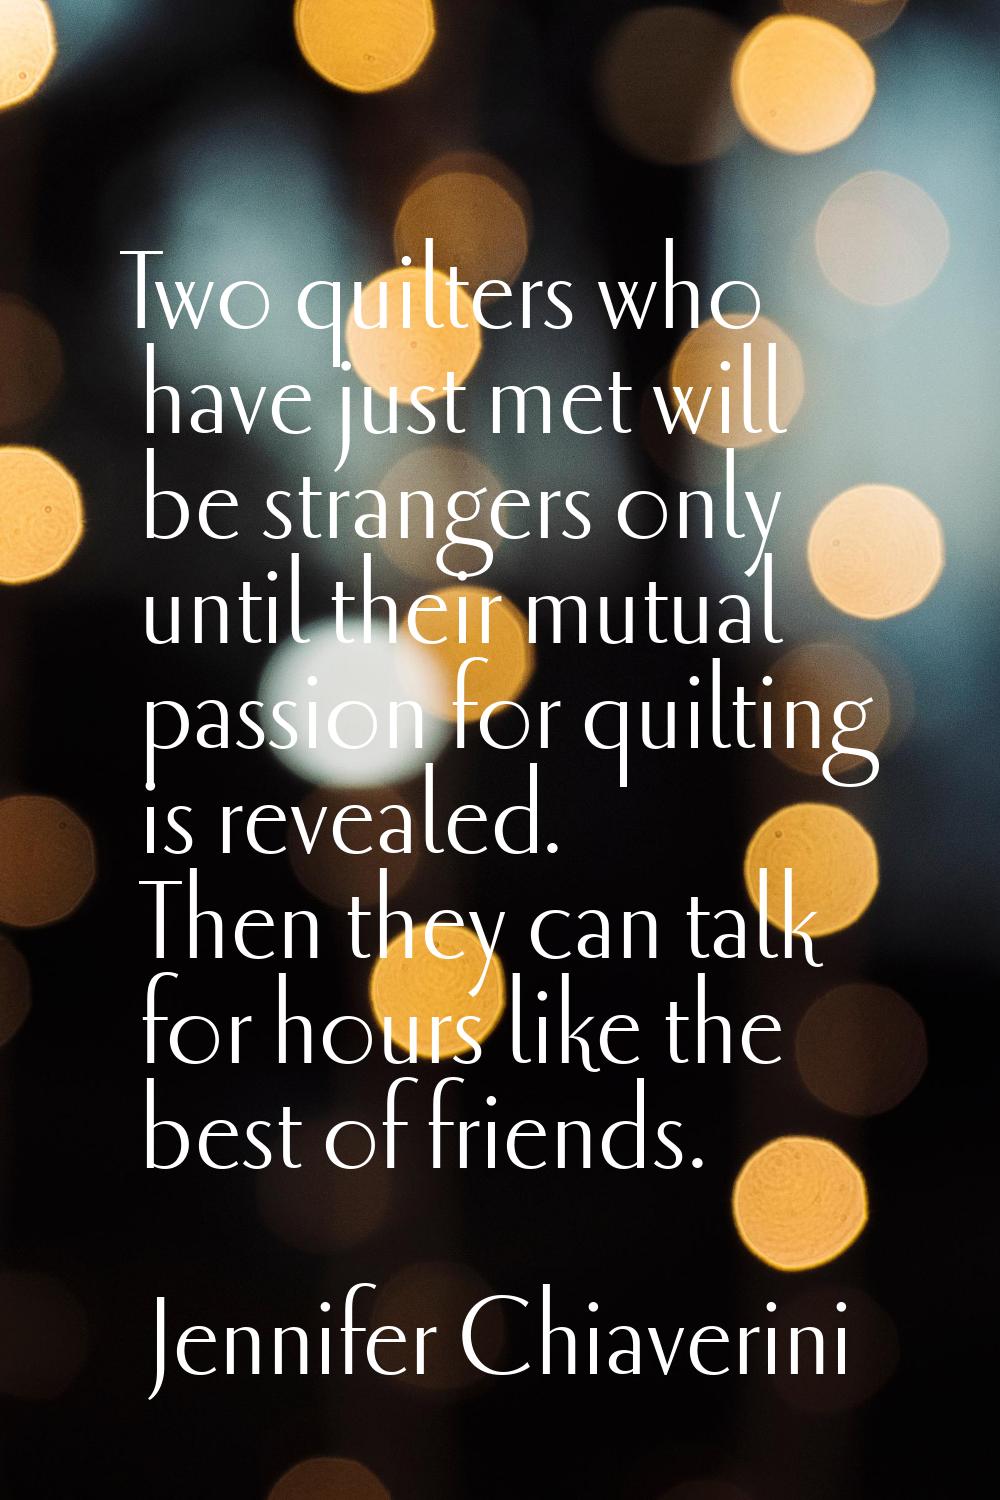 Two quilters who have just met will be strangers only until their mutual passion for quilting is re